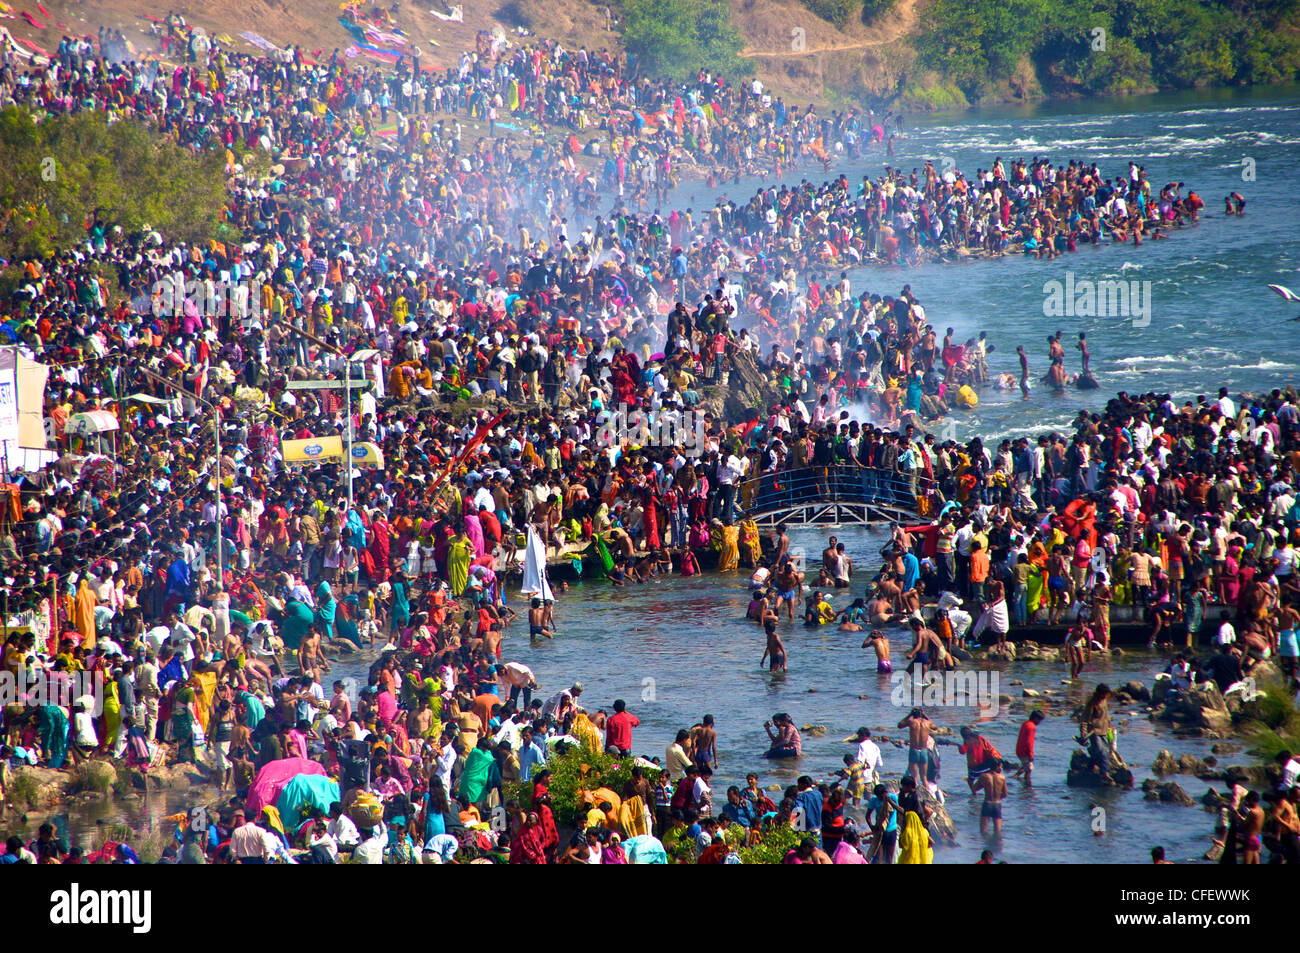 Thousands of People Crowding the Marble Falls on a Holy Day in India Stock Photo